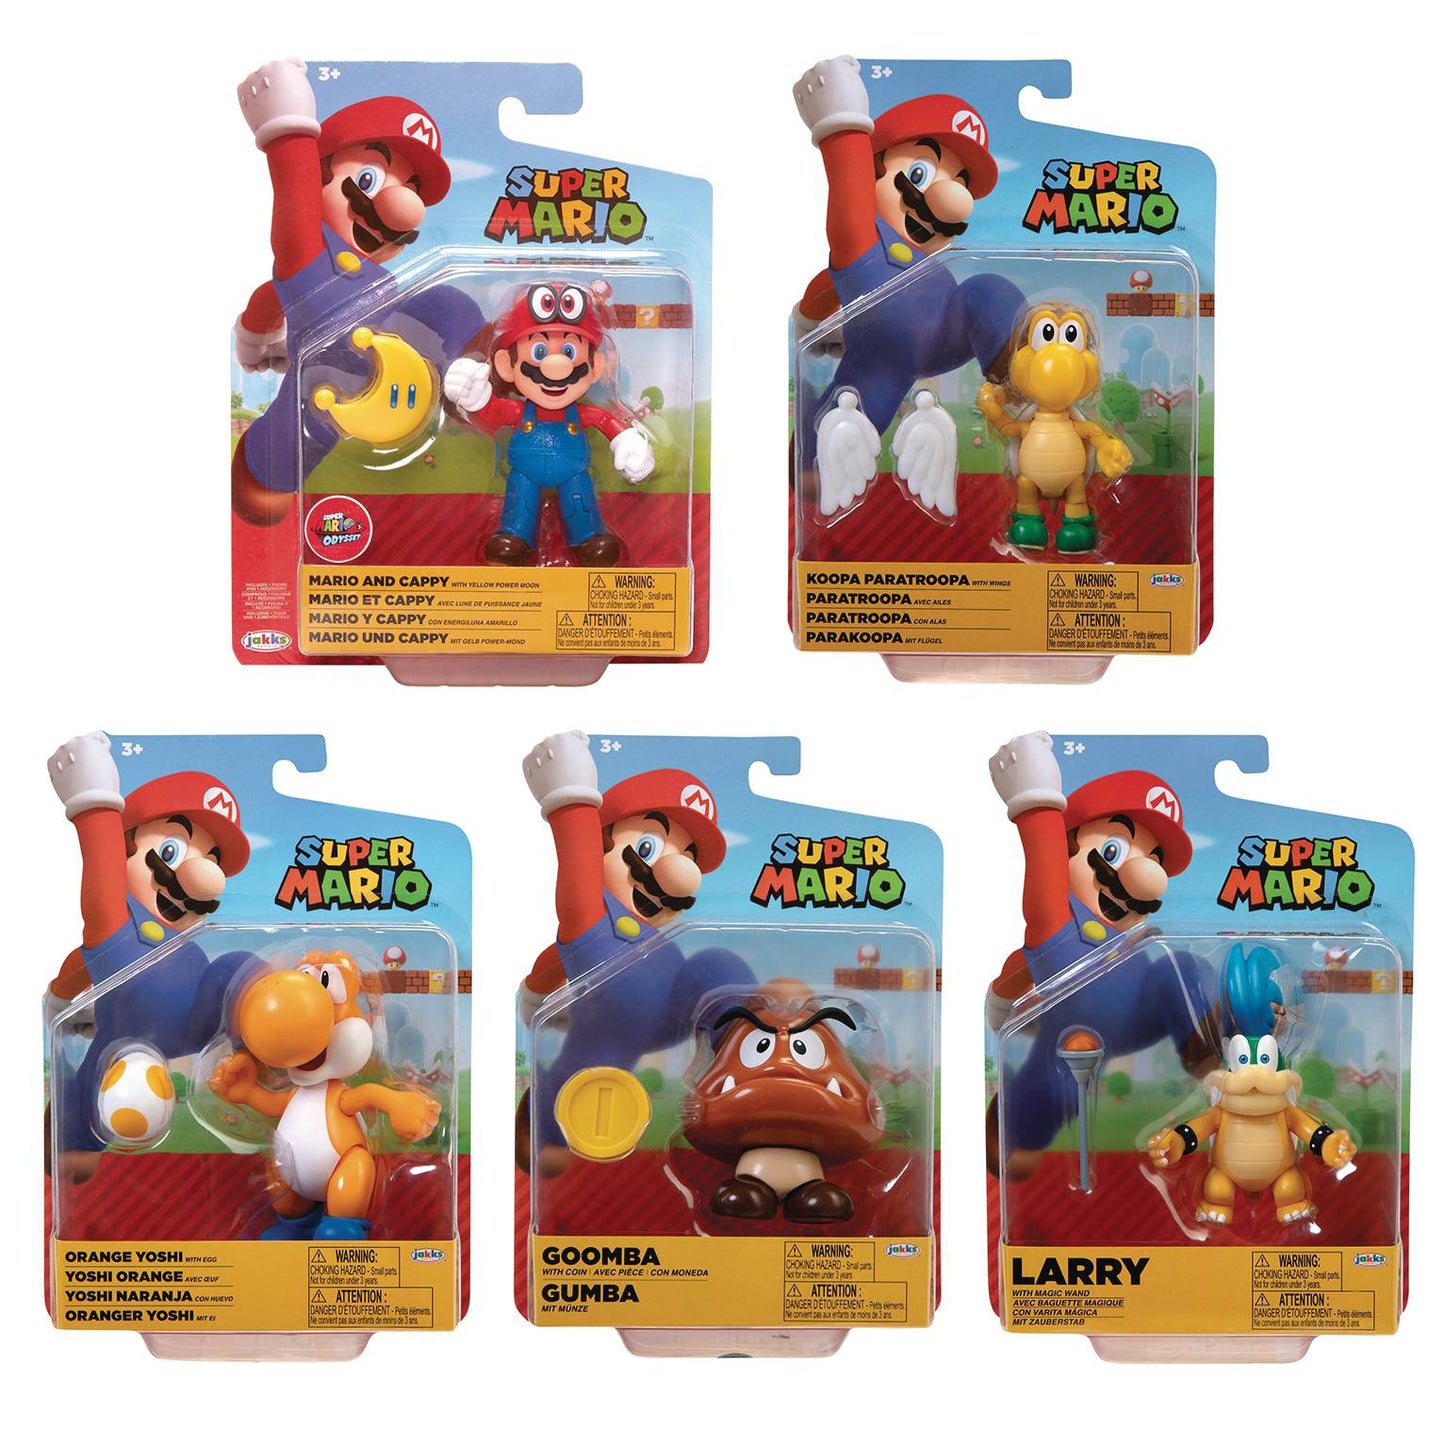 Super Mario - Larry with Magic Wand 4" Action Figure